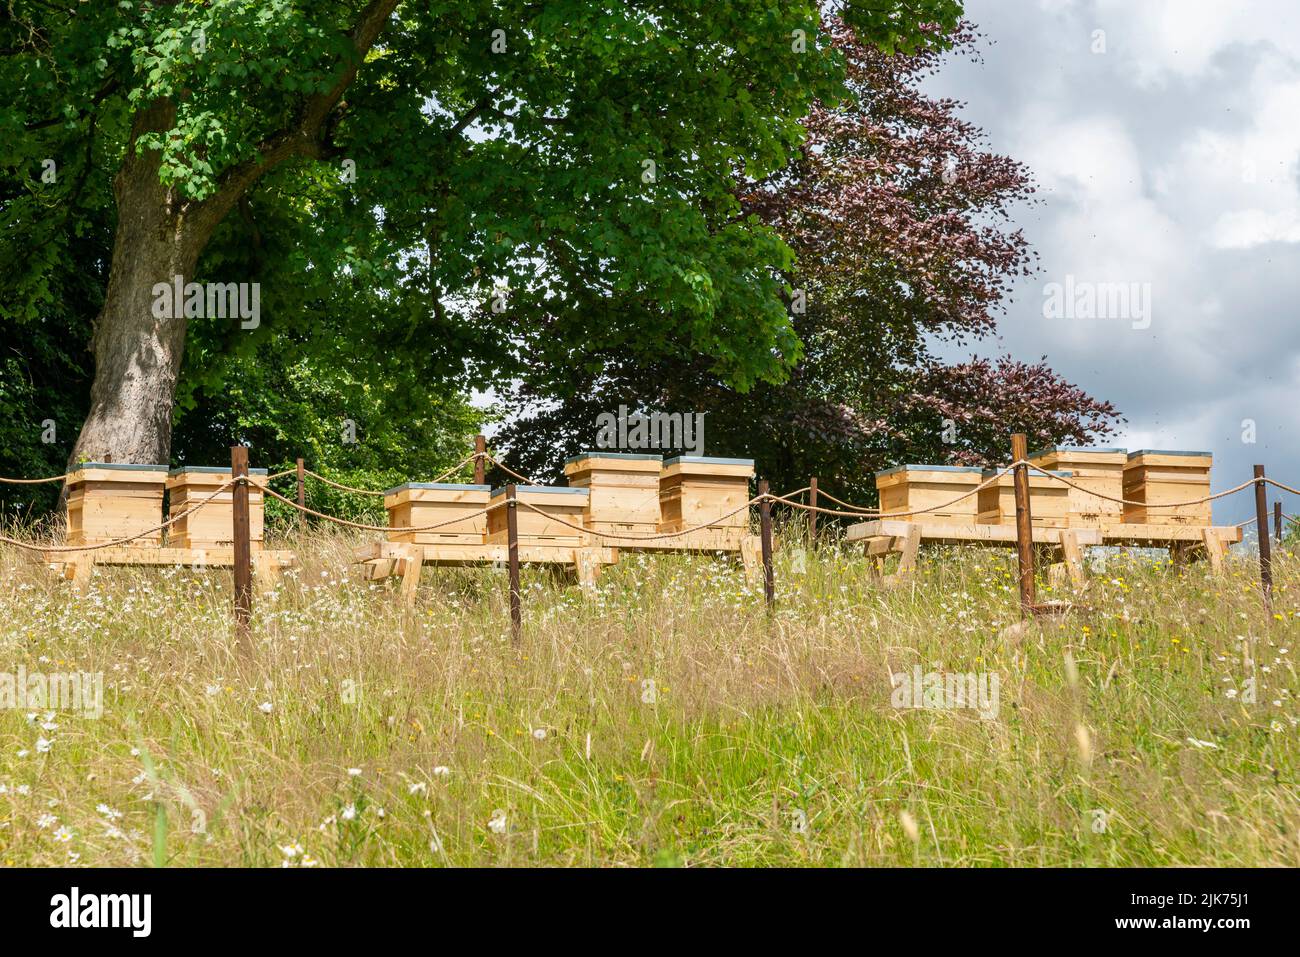 Row of bee hives surrounded by grasses and wildflowers at Thornbridge Hall gardens in Derbyshire, England. Stock Photo